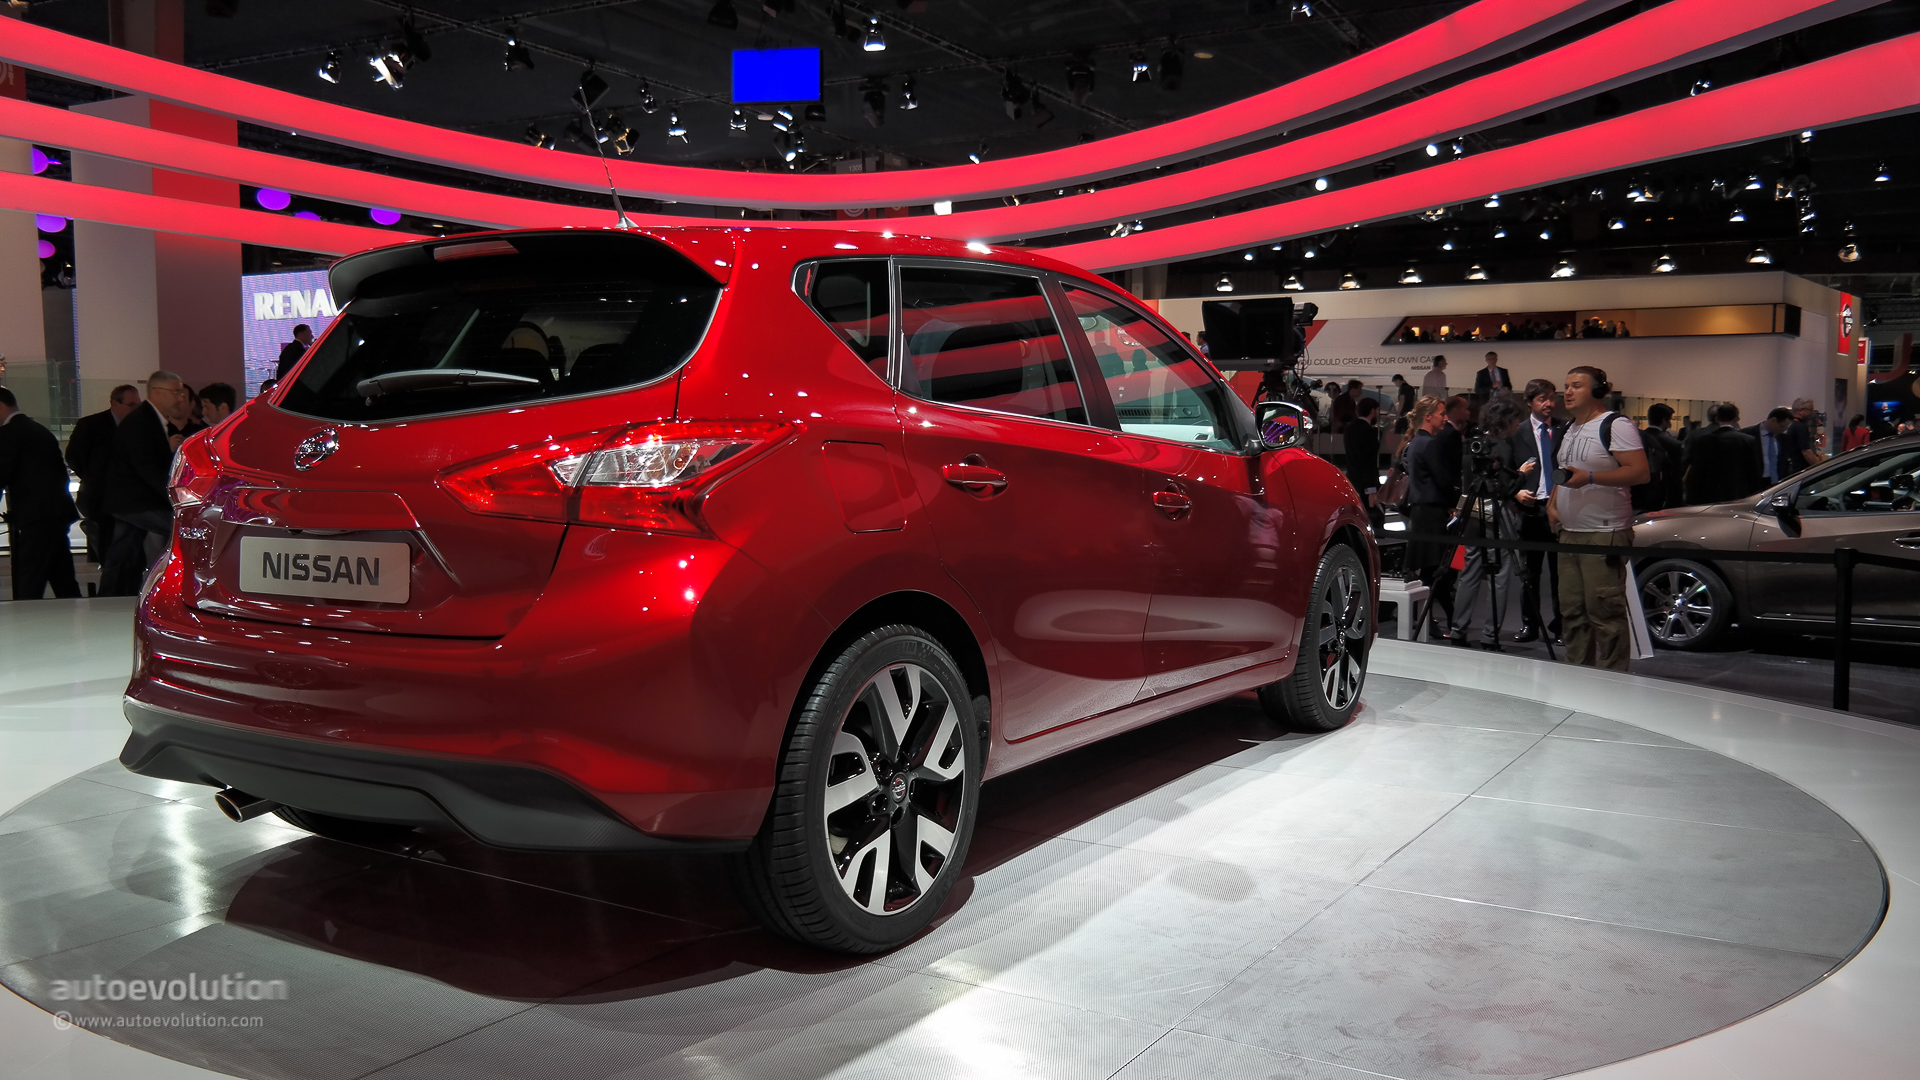 nissan-pulsar-completes-the-companys-line-up-at-paris-photo-gallery_9